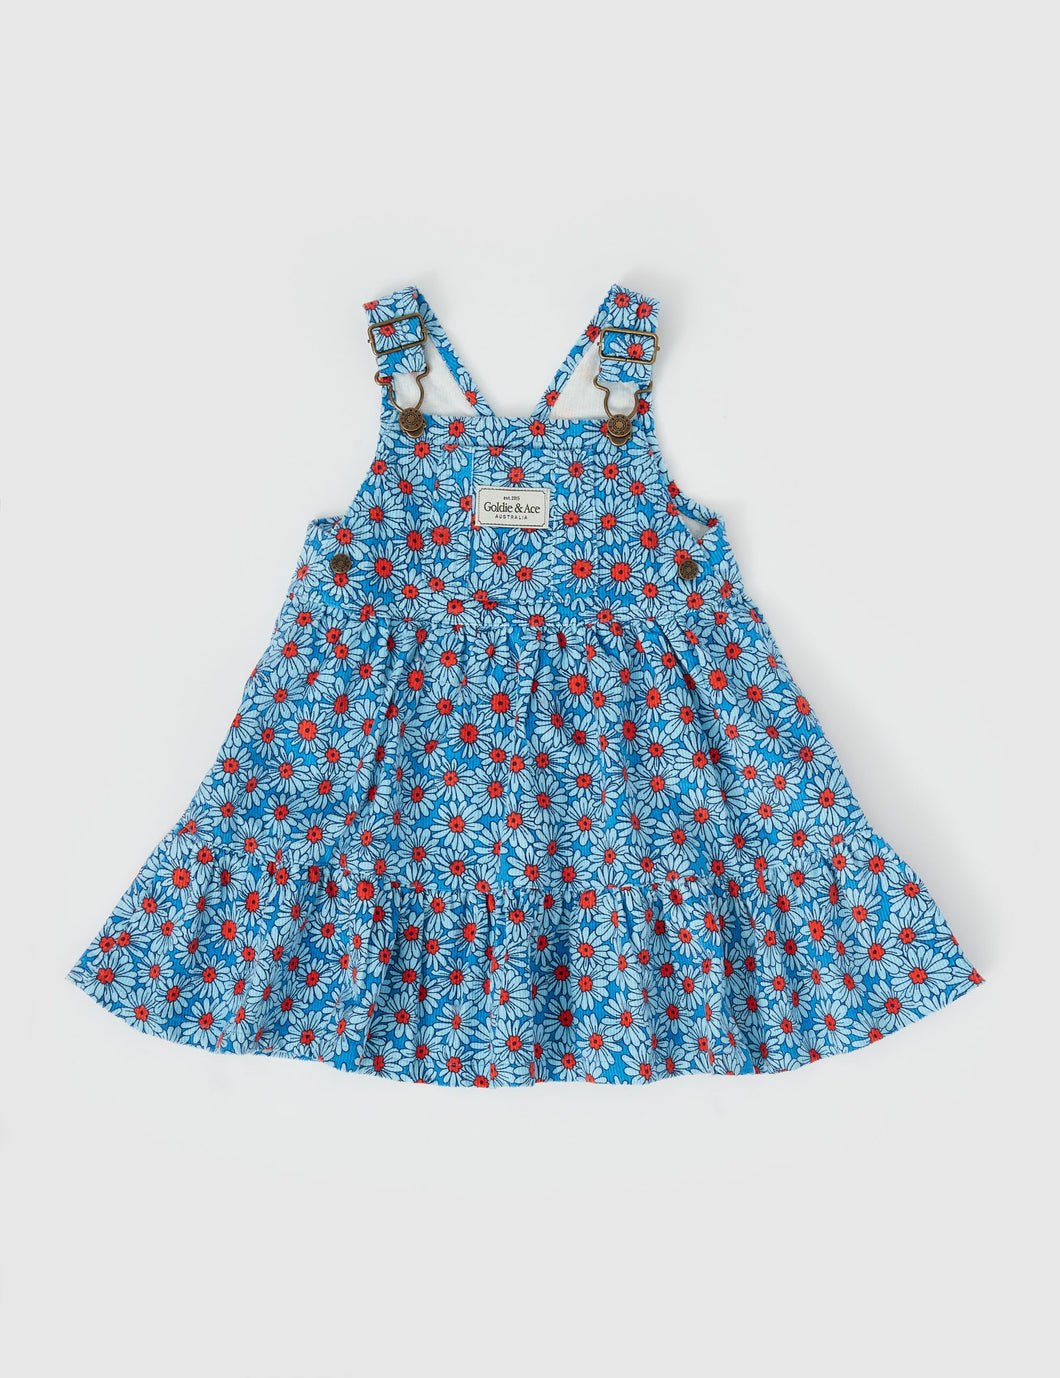 Dixie Daisy Tiered Corduroy Pinafore Dress - Blue/Red